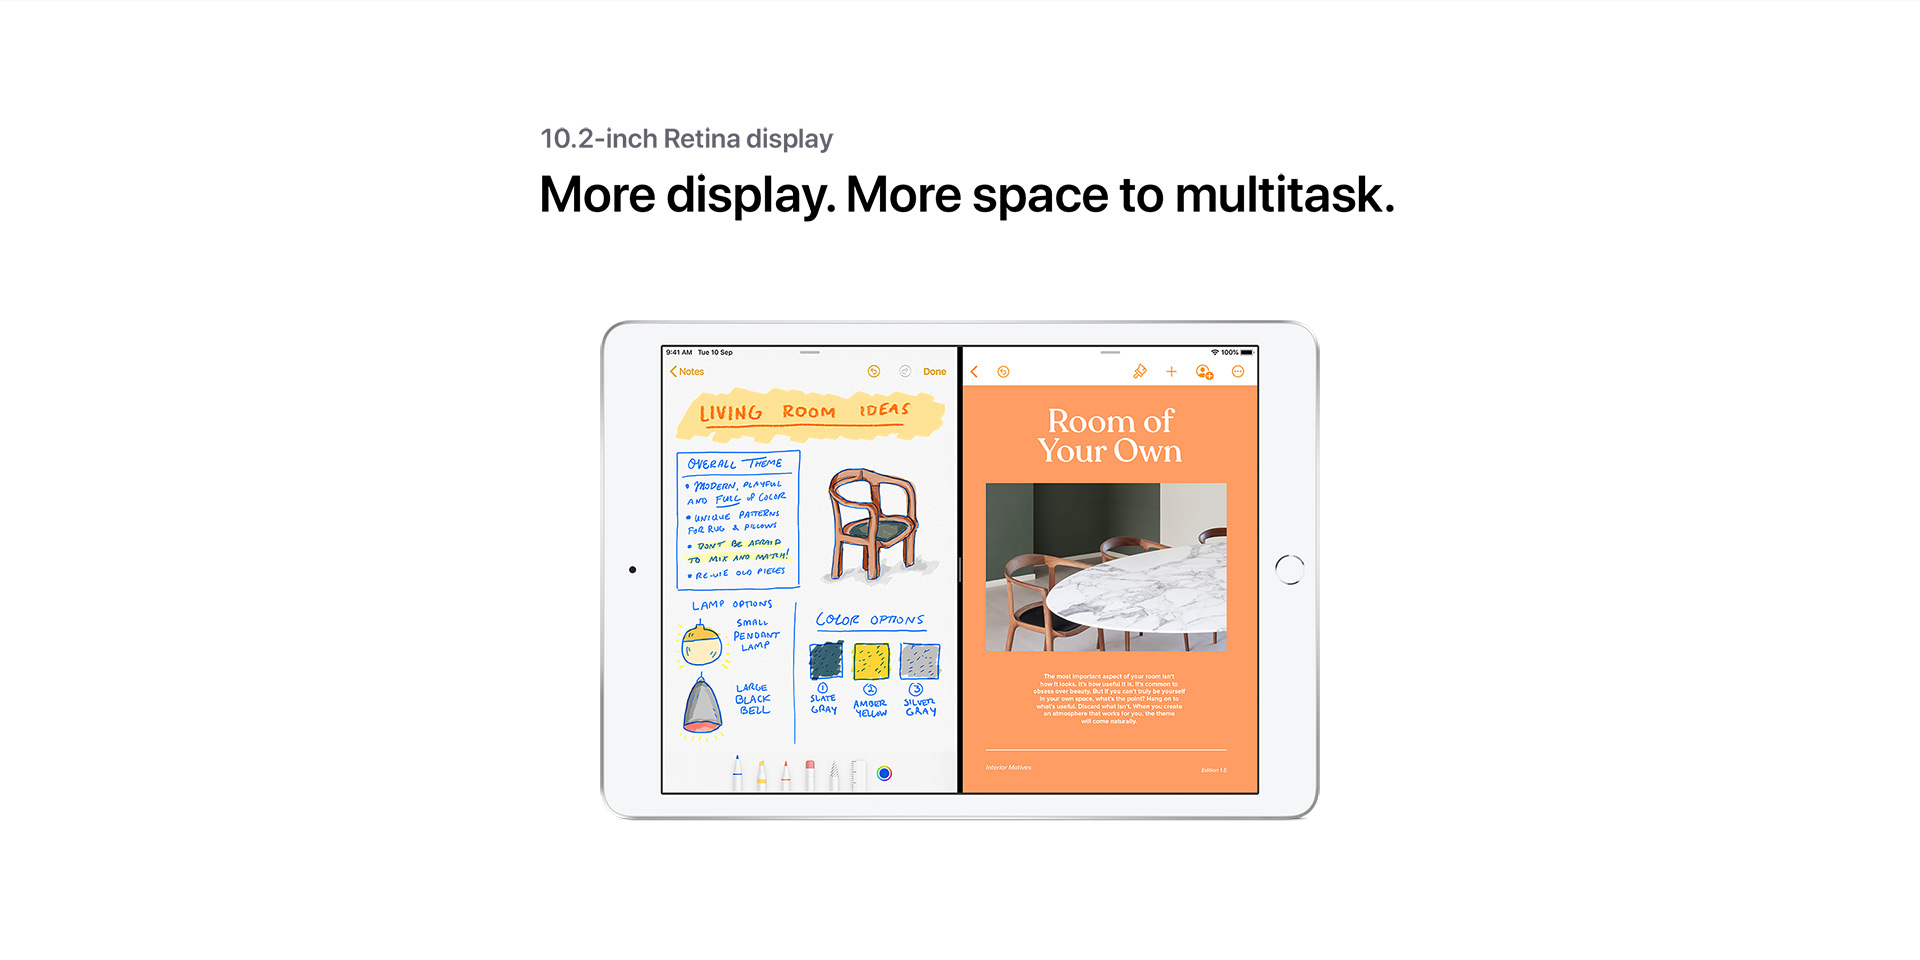 More display. More space to multitask.